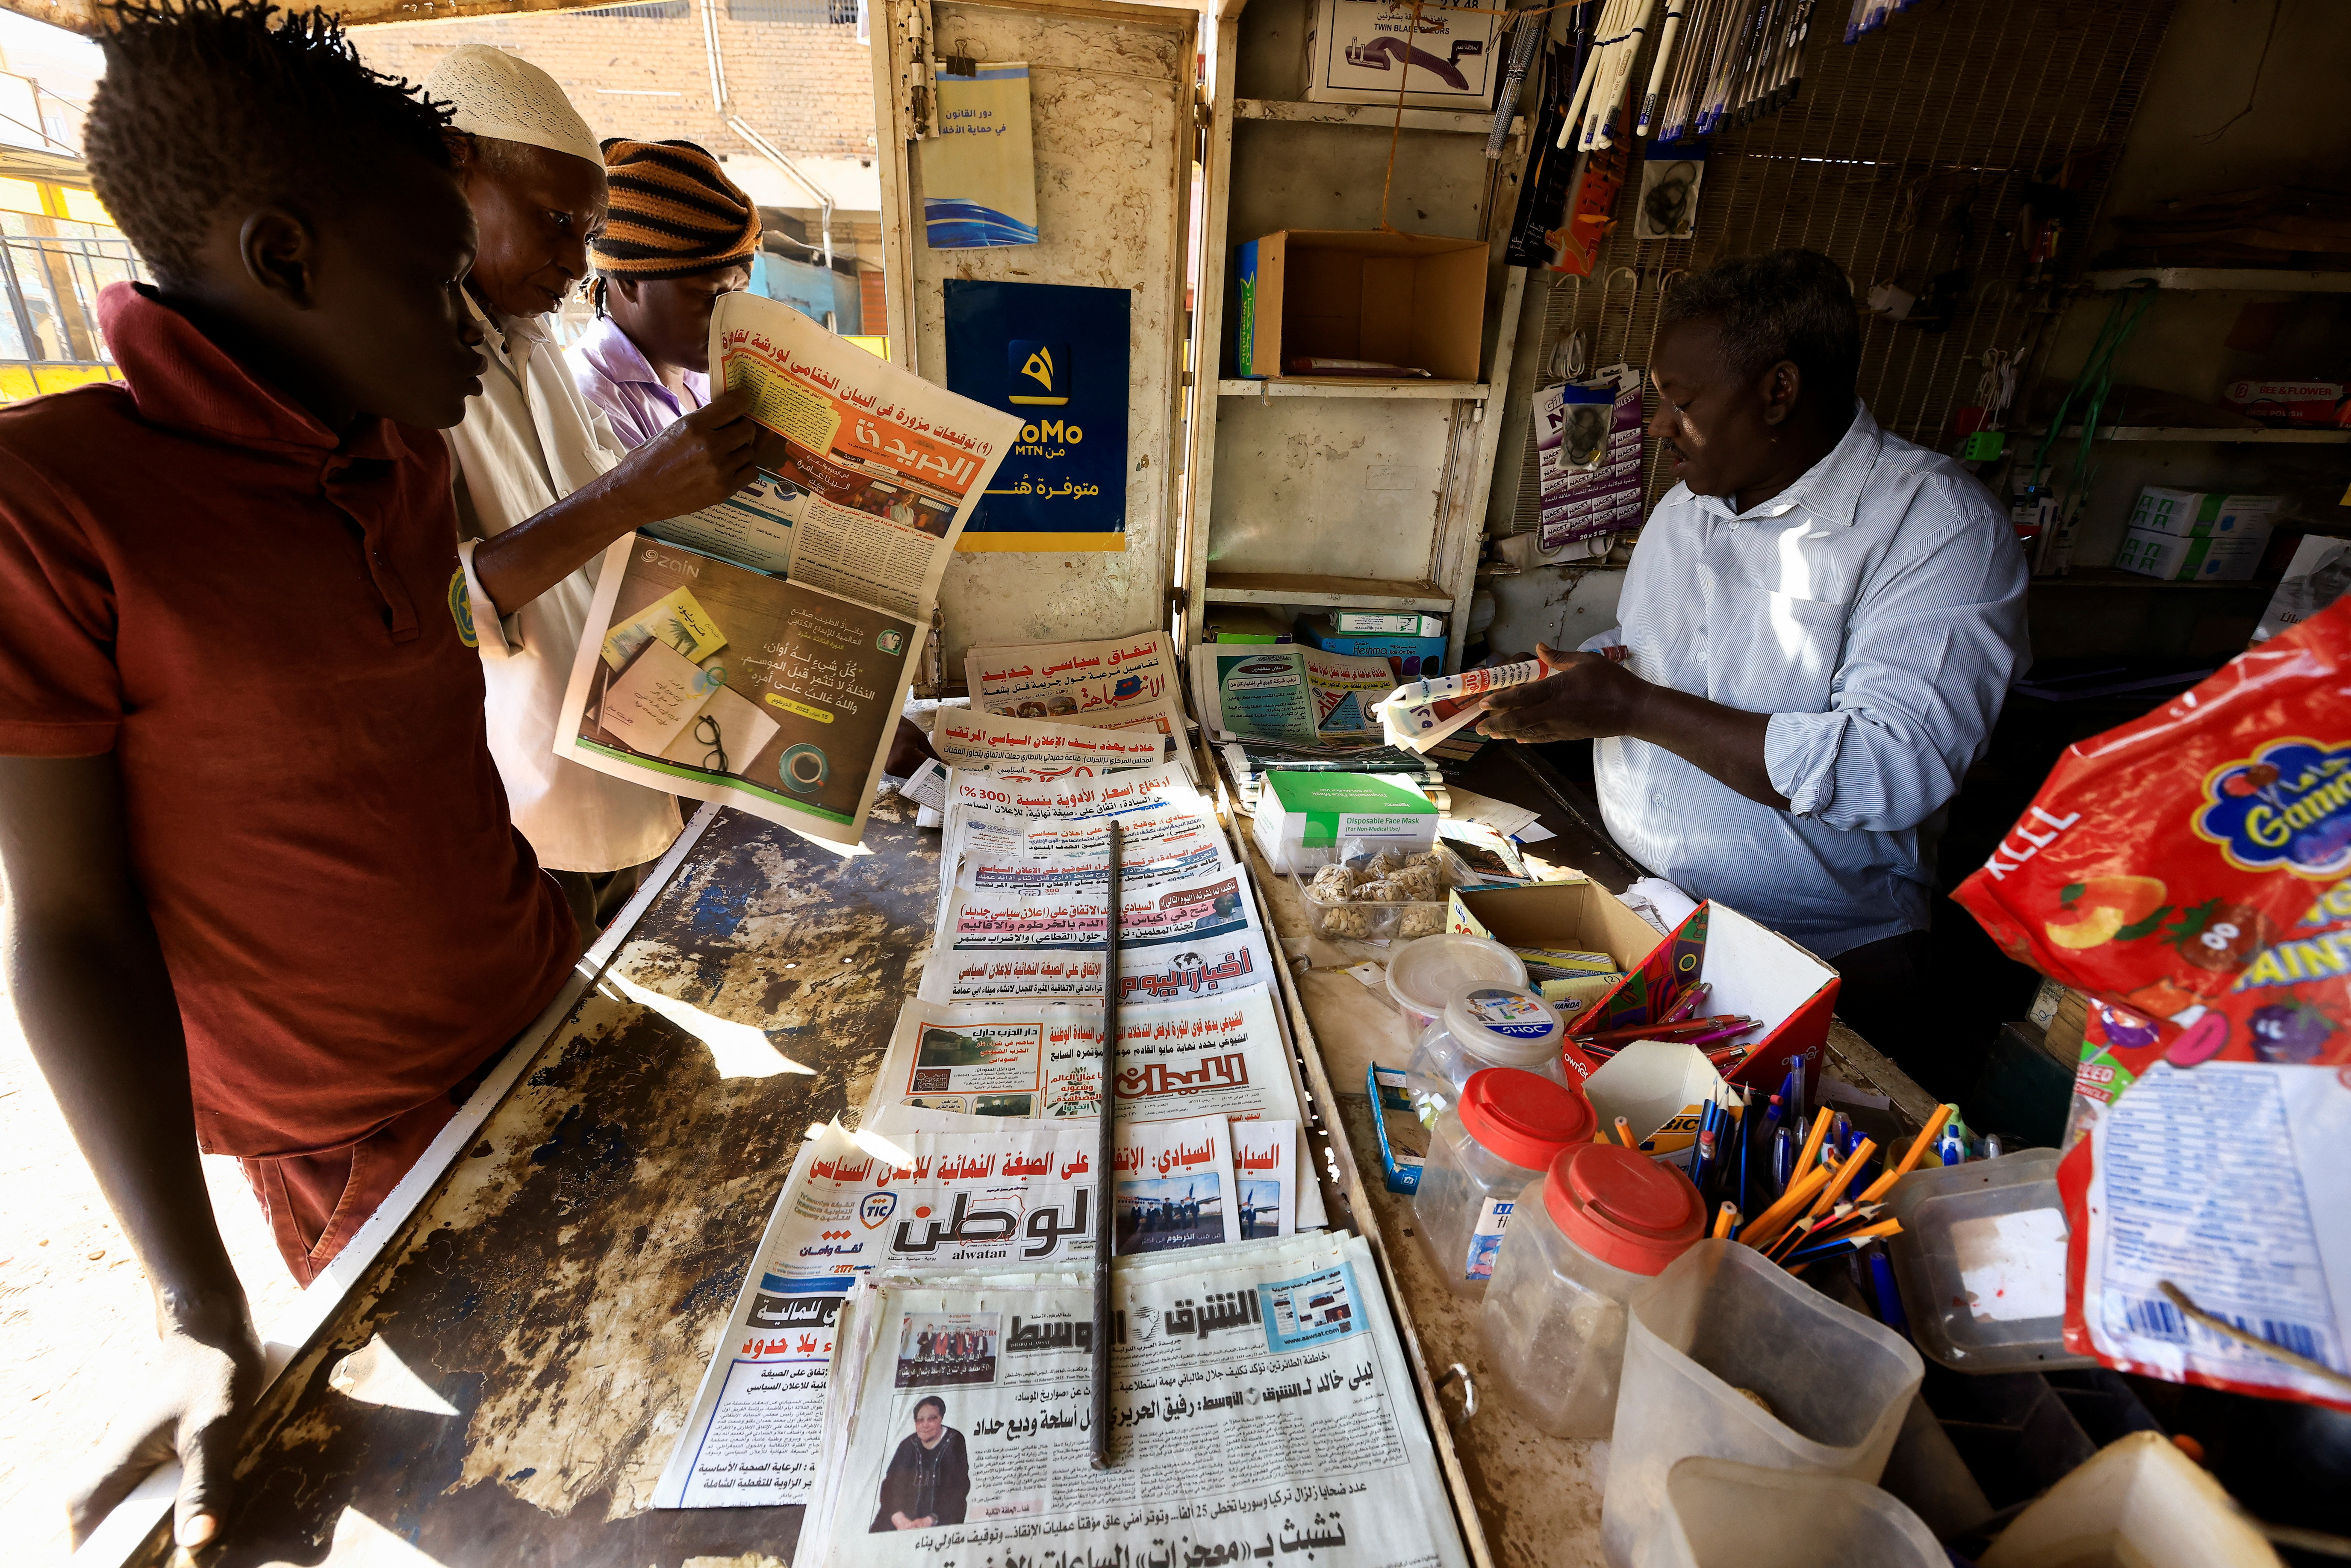 Owner of Al-Zikriyat library chats with people while he looks at newspapers in Omdurman